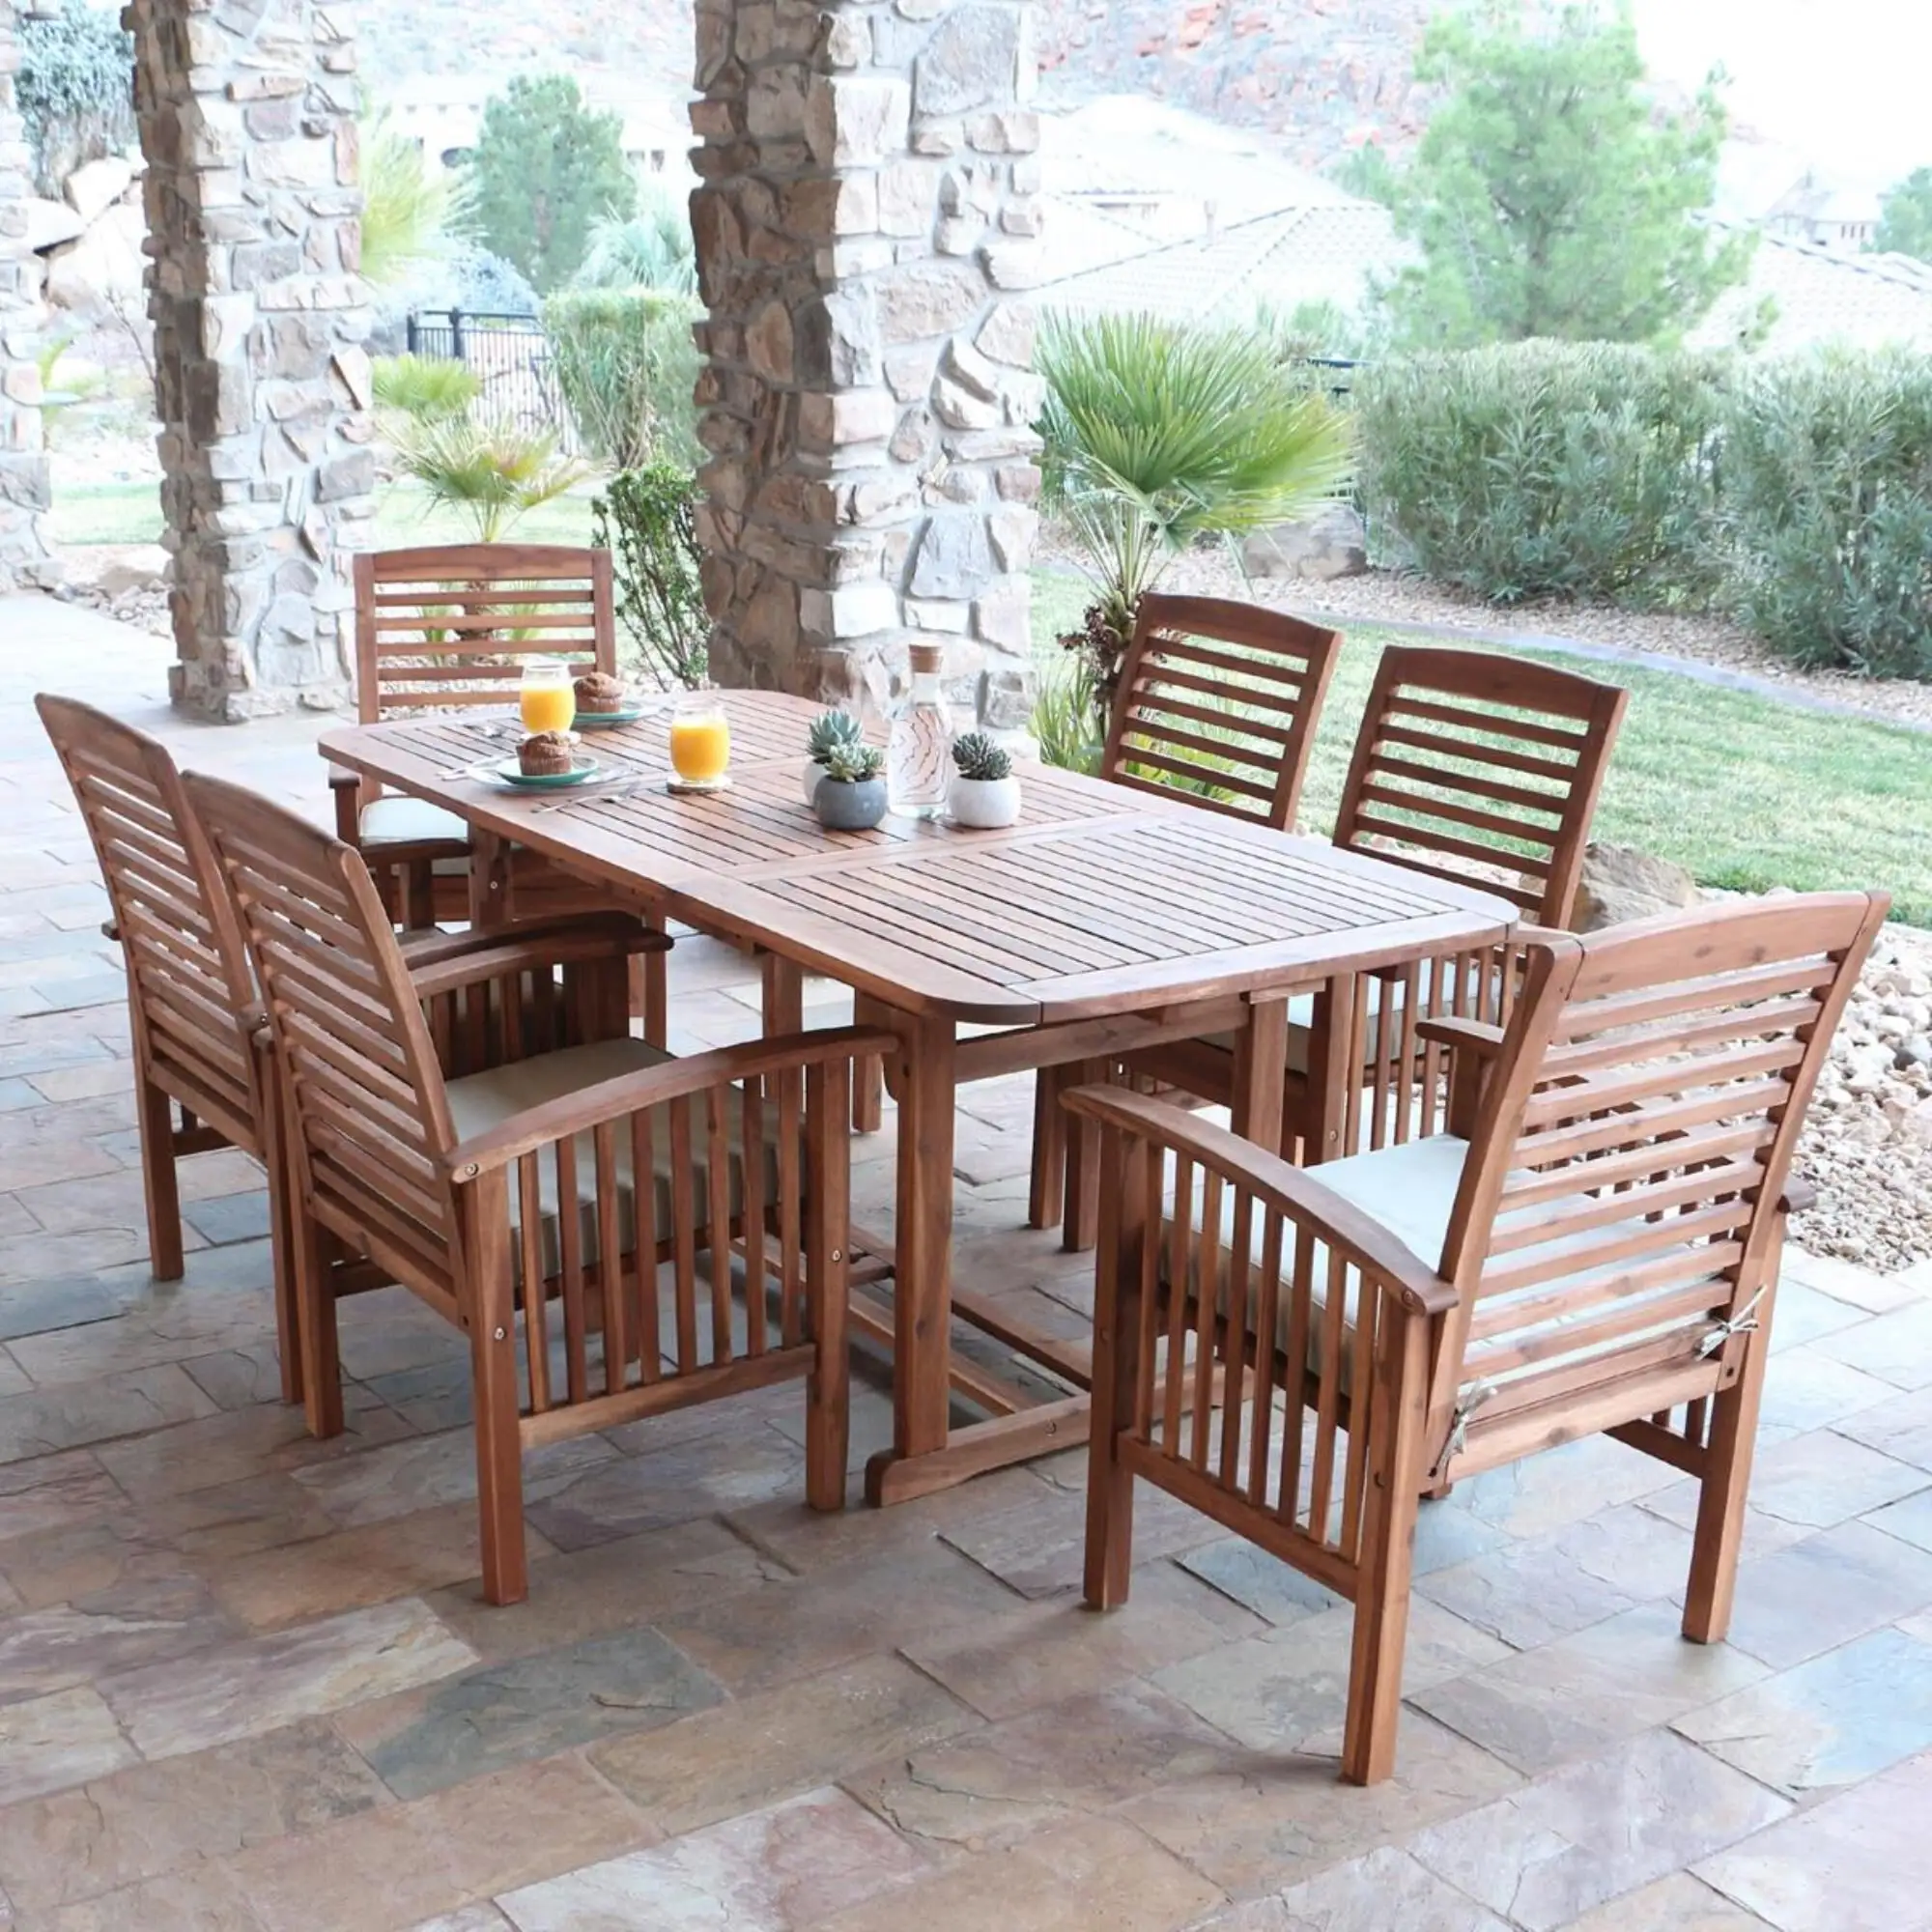 Commercial Hotel Courtyard Outdoor Plastic Wood Folding Restaurant Furniture Garden Fabric Dining Tables And Chairs